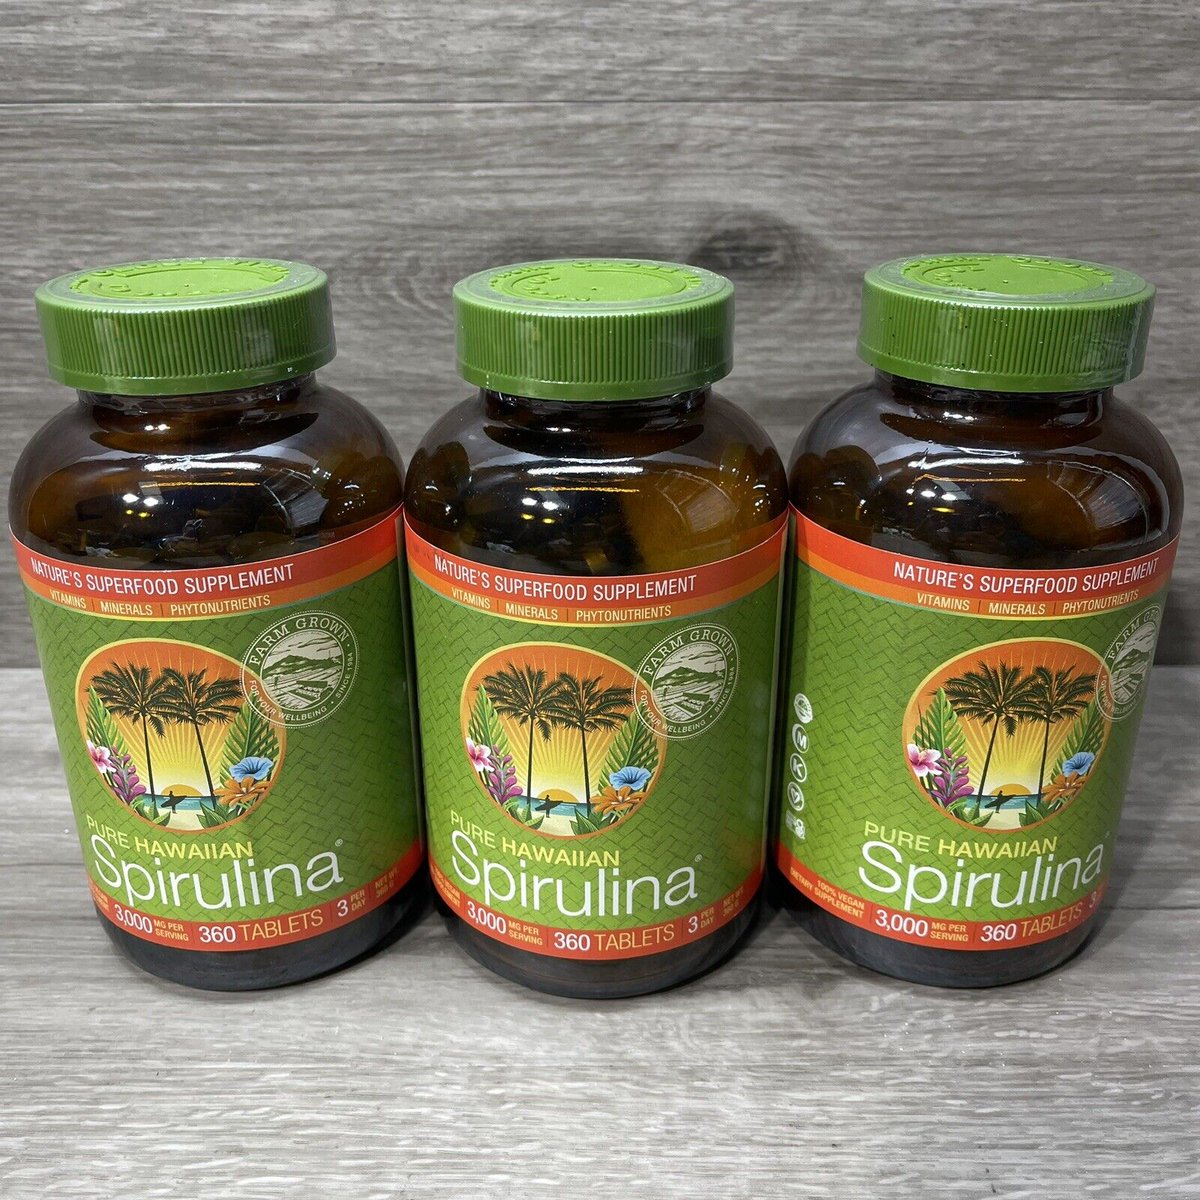 There's one superfood that stands out among the rest. Spirulina can remedy almost any nutrient deficiency due to its ultra high concentrations of vitamins and minerals. It helps prevent cancer and it's super effective at removing heavy metals & toxins: amazon.com/Pure-Hawaiian-… #ad